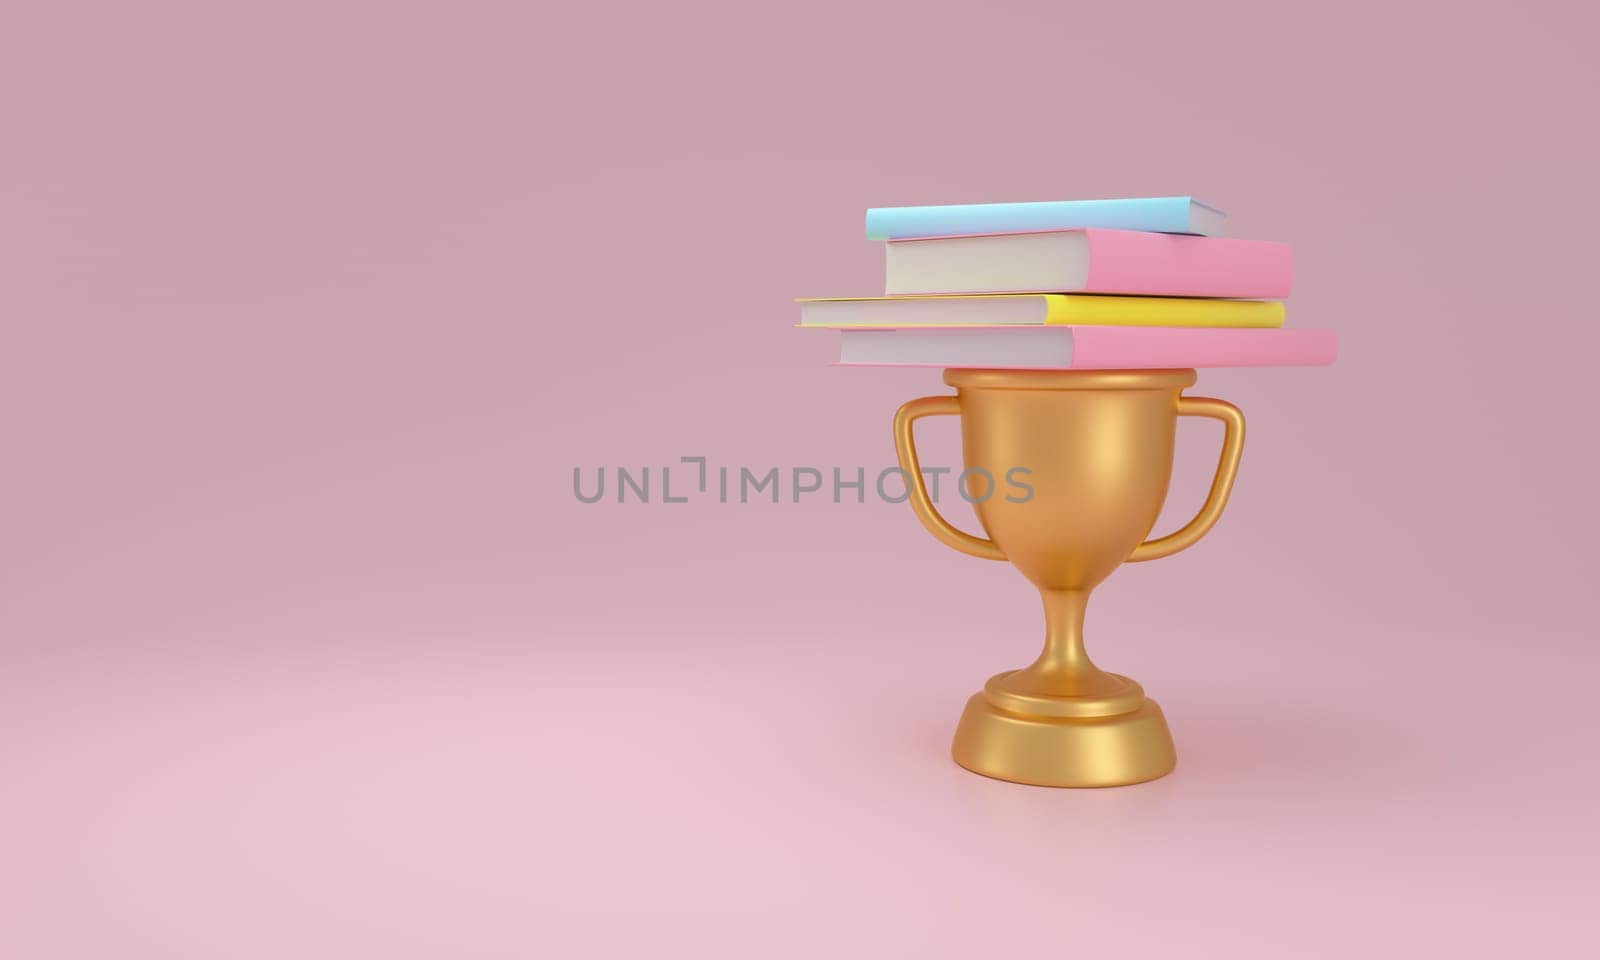 Scholarly Success Symbolized by Books on a Trophy. by ImagesRouges